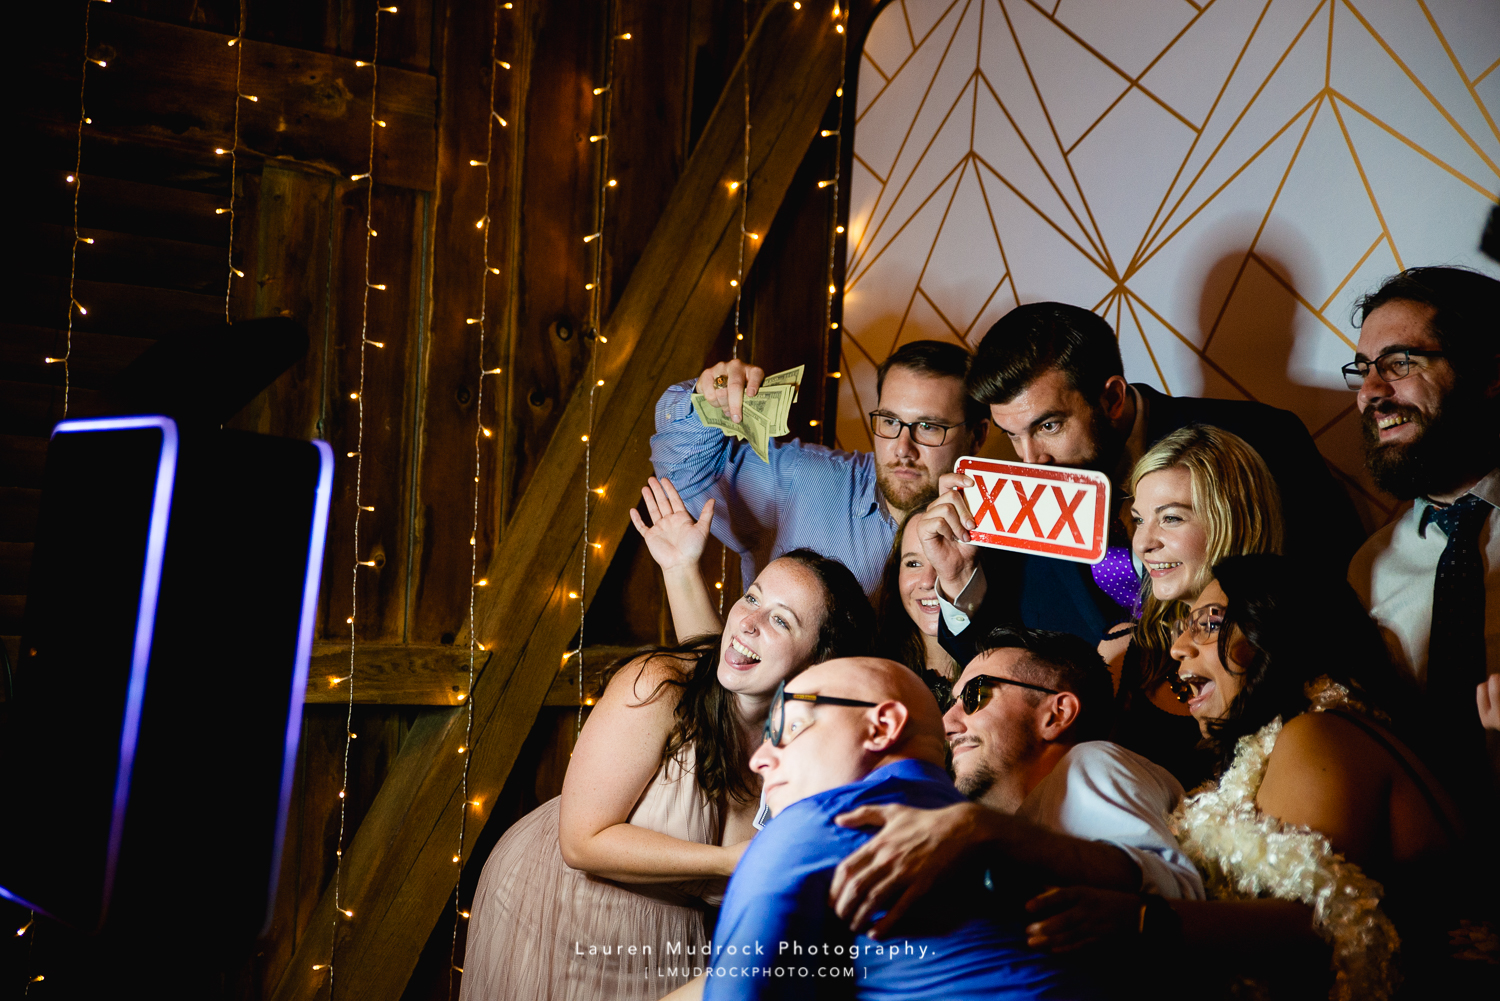 photo booth group